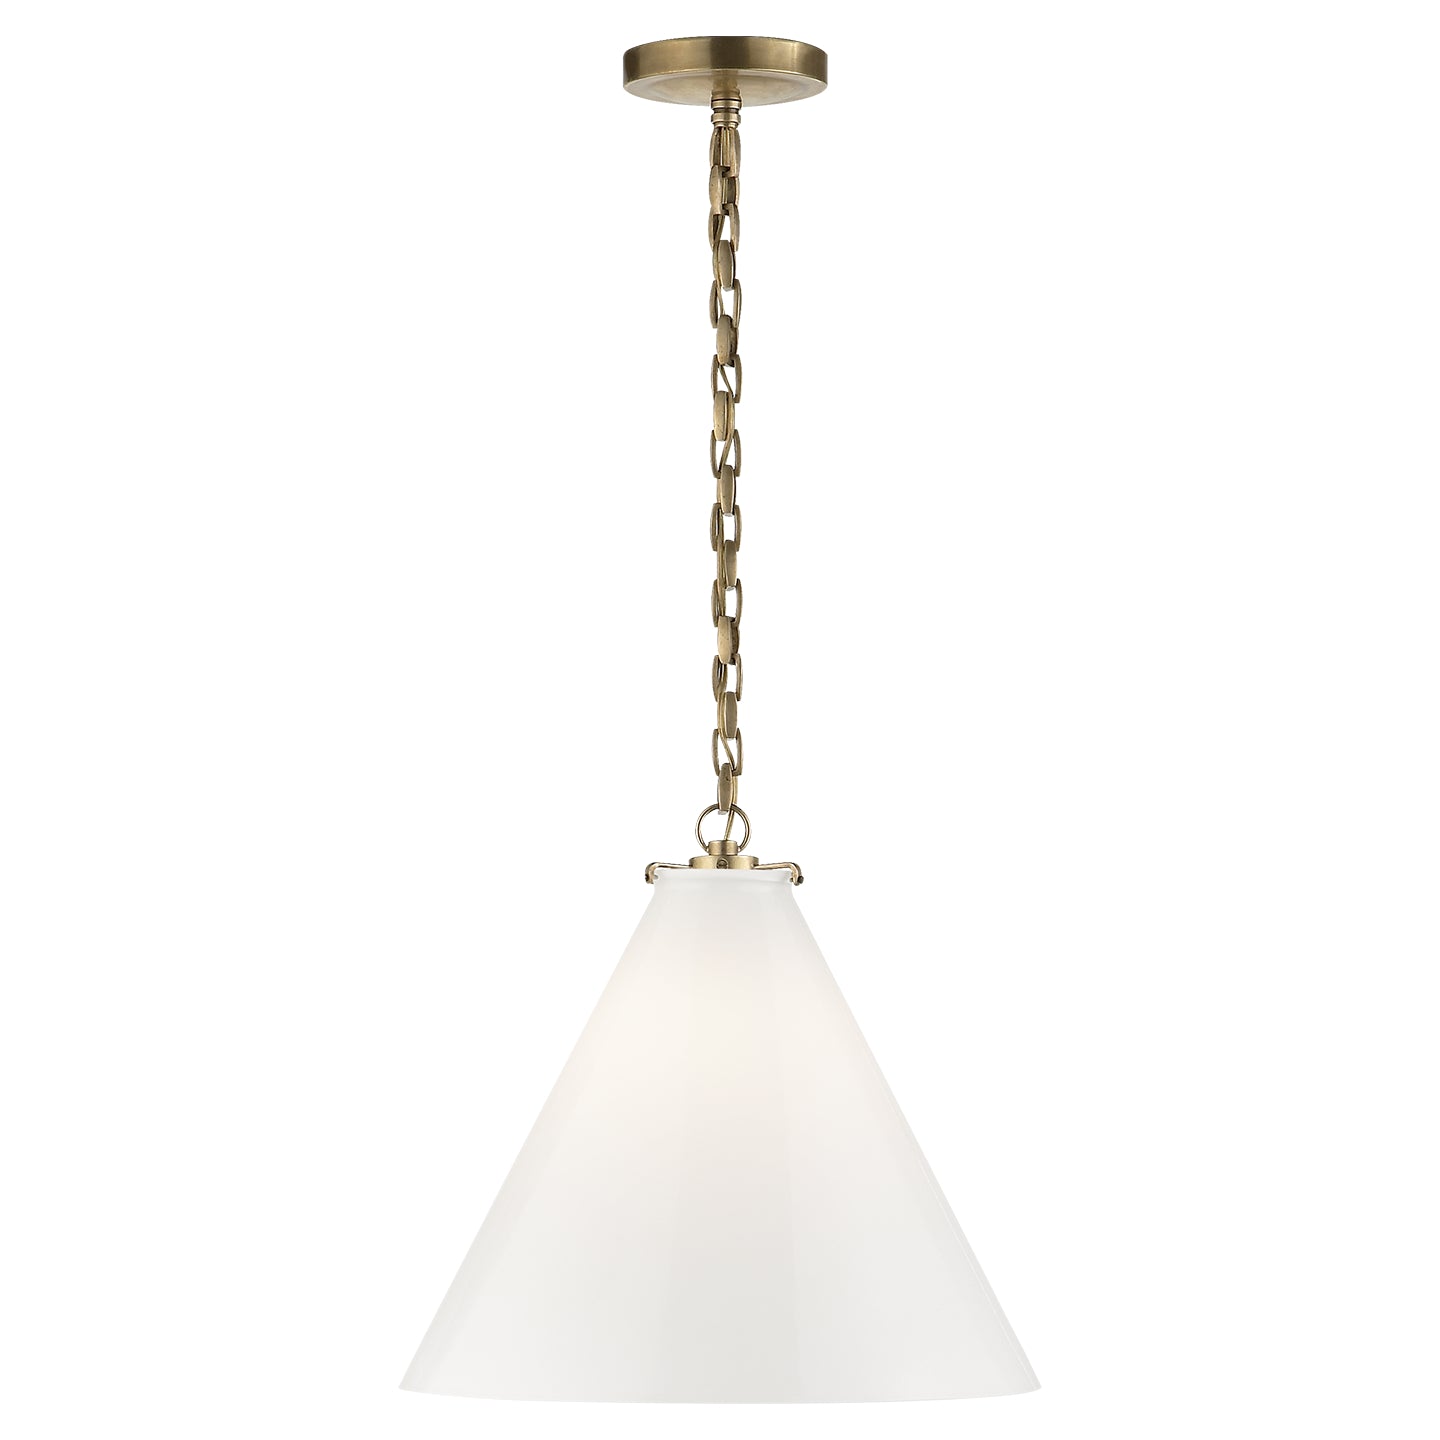 Visual Comfort Signature - TOB 5226HAB/G6-WG - One Light Pendant - Katie Conical - Hand-Rubbed Antique Brass